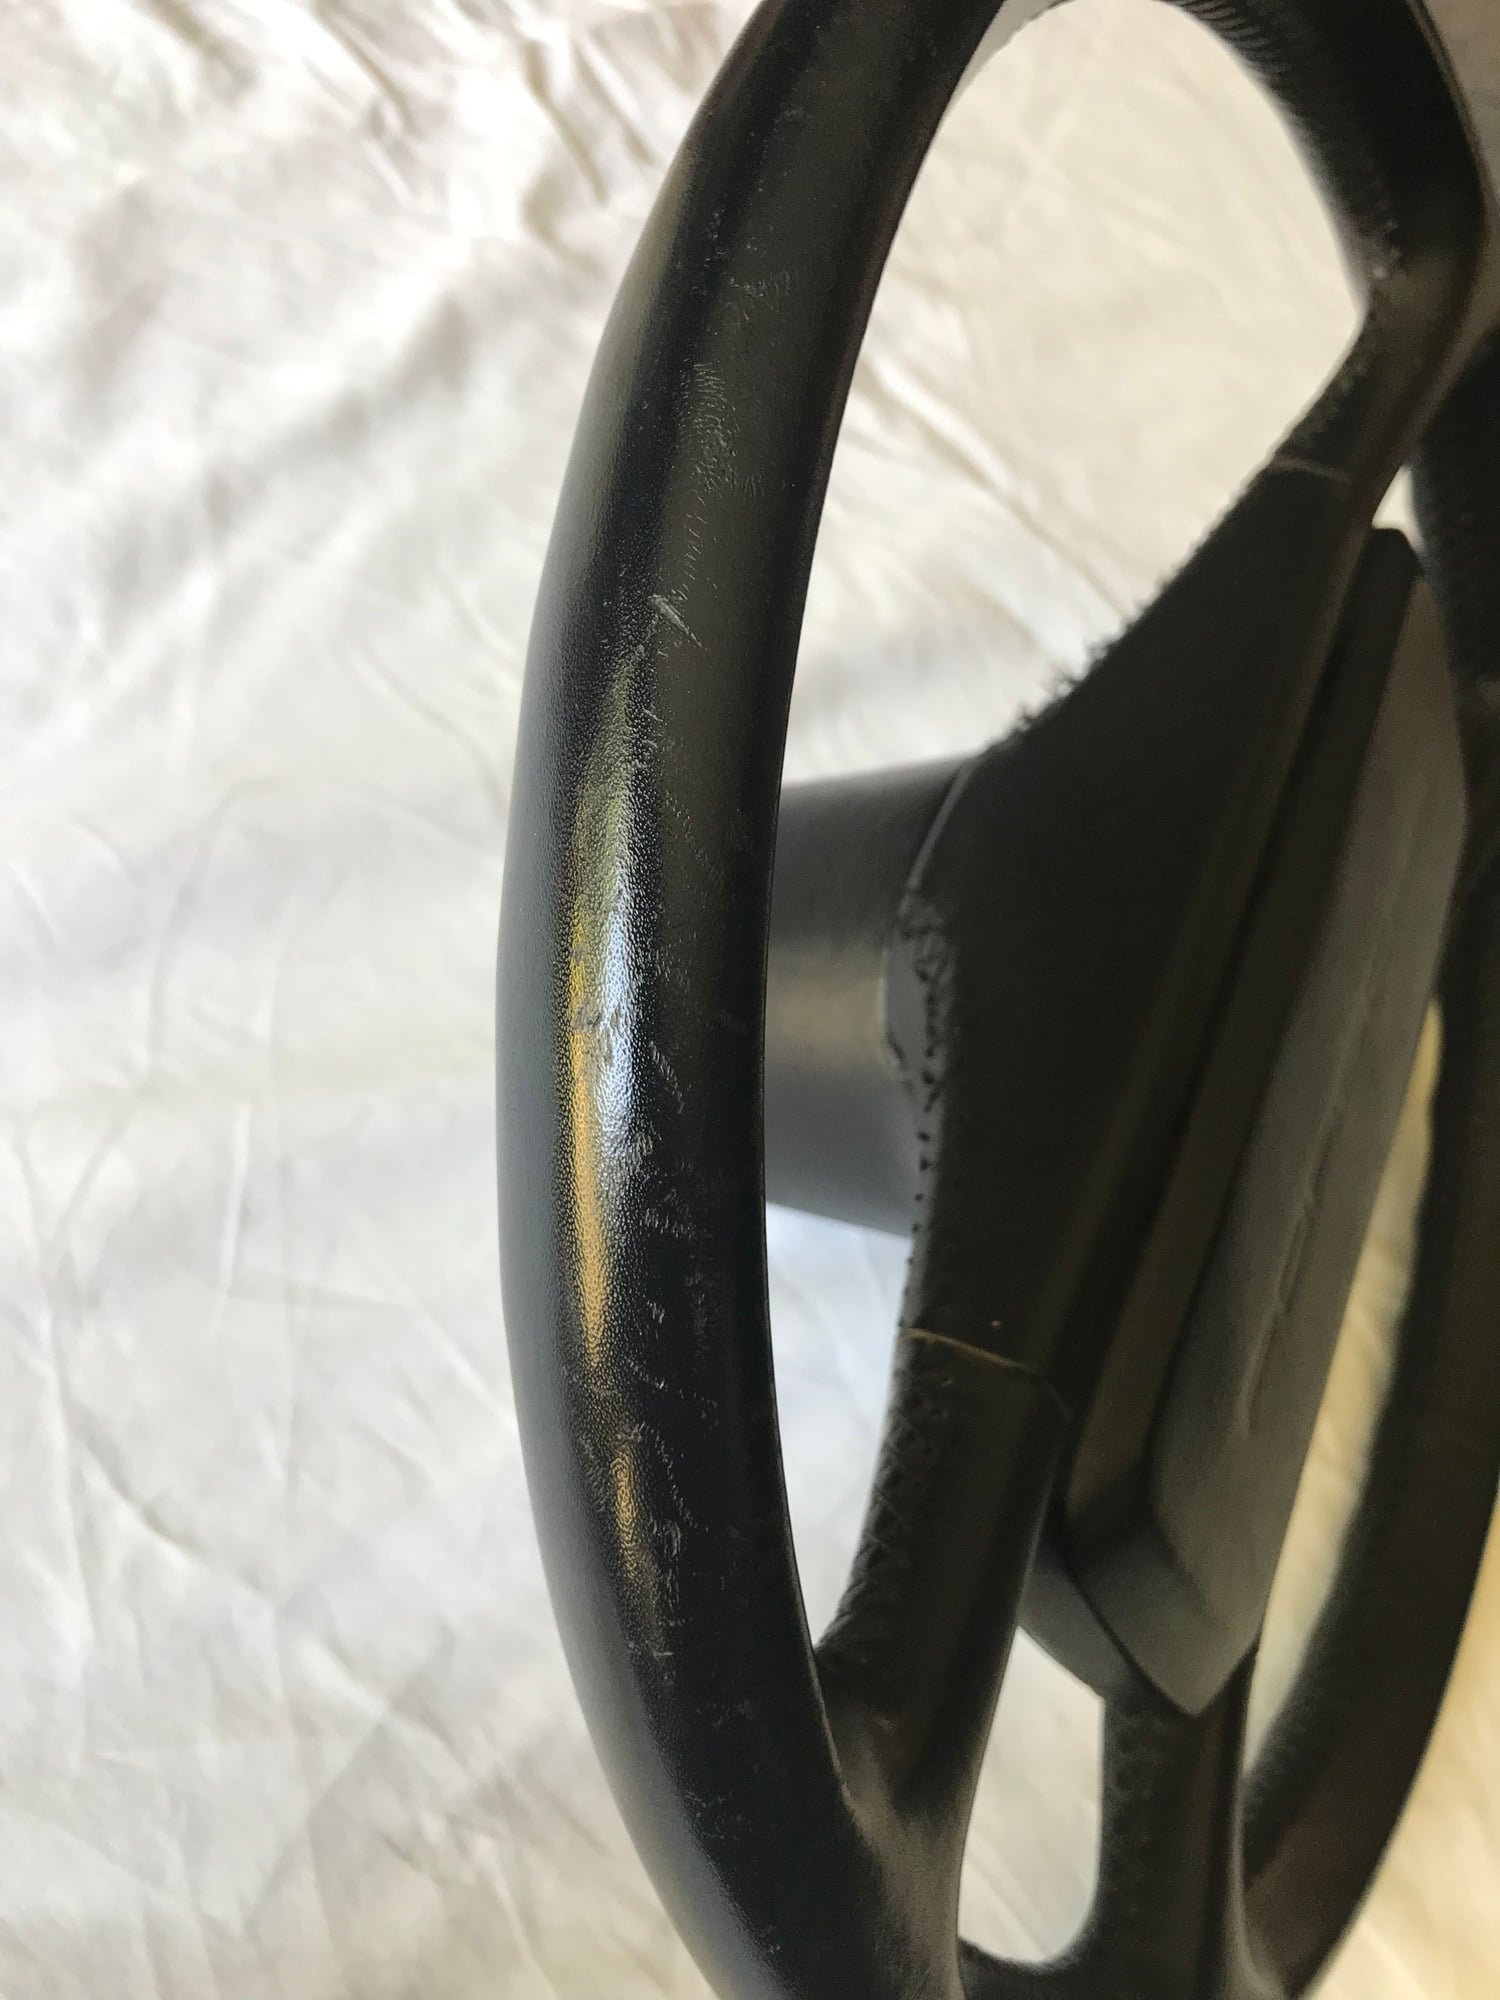 Interior/Upholstery - 89' 911/964 steering wheel - Used - All Years Porsche 911 - Redlands, CA 92373, United States